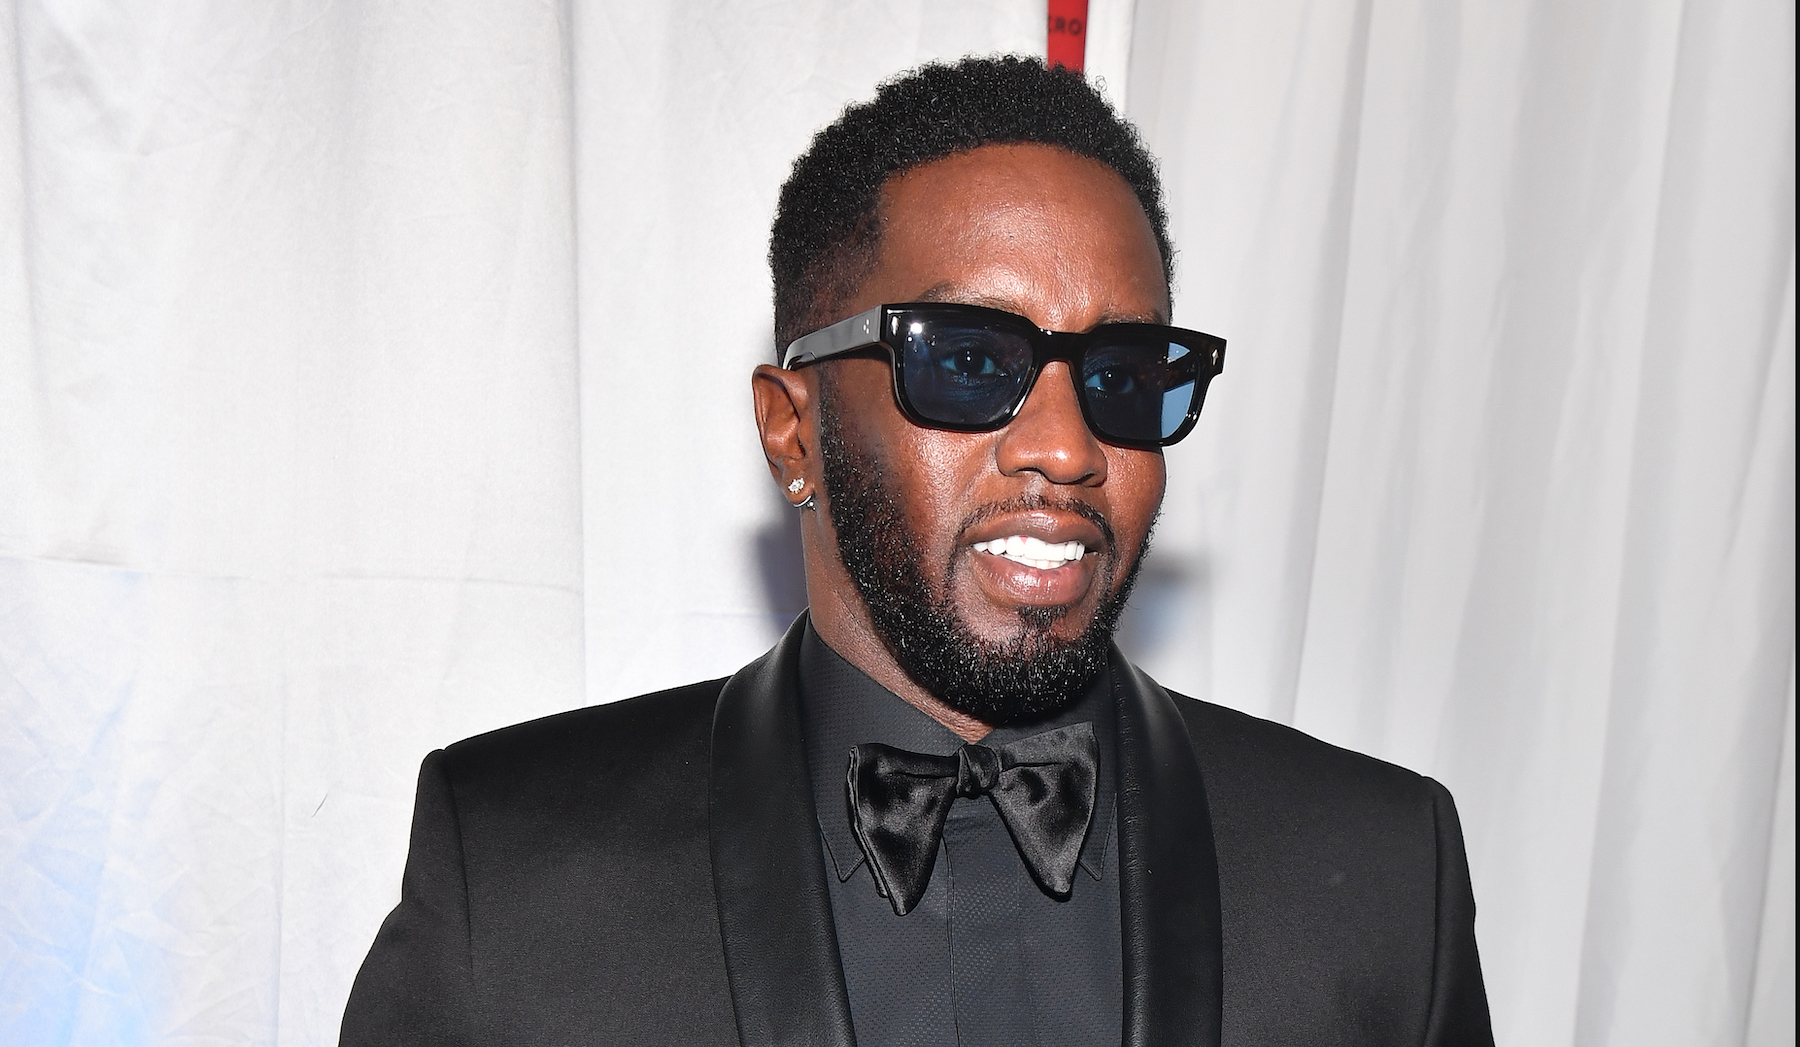 Sean "Diddy" Combs, who has a music catalog dating back over 2 decades, wearing a black tuxedo